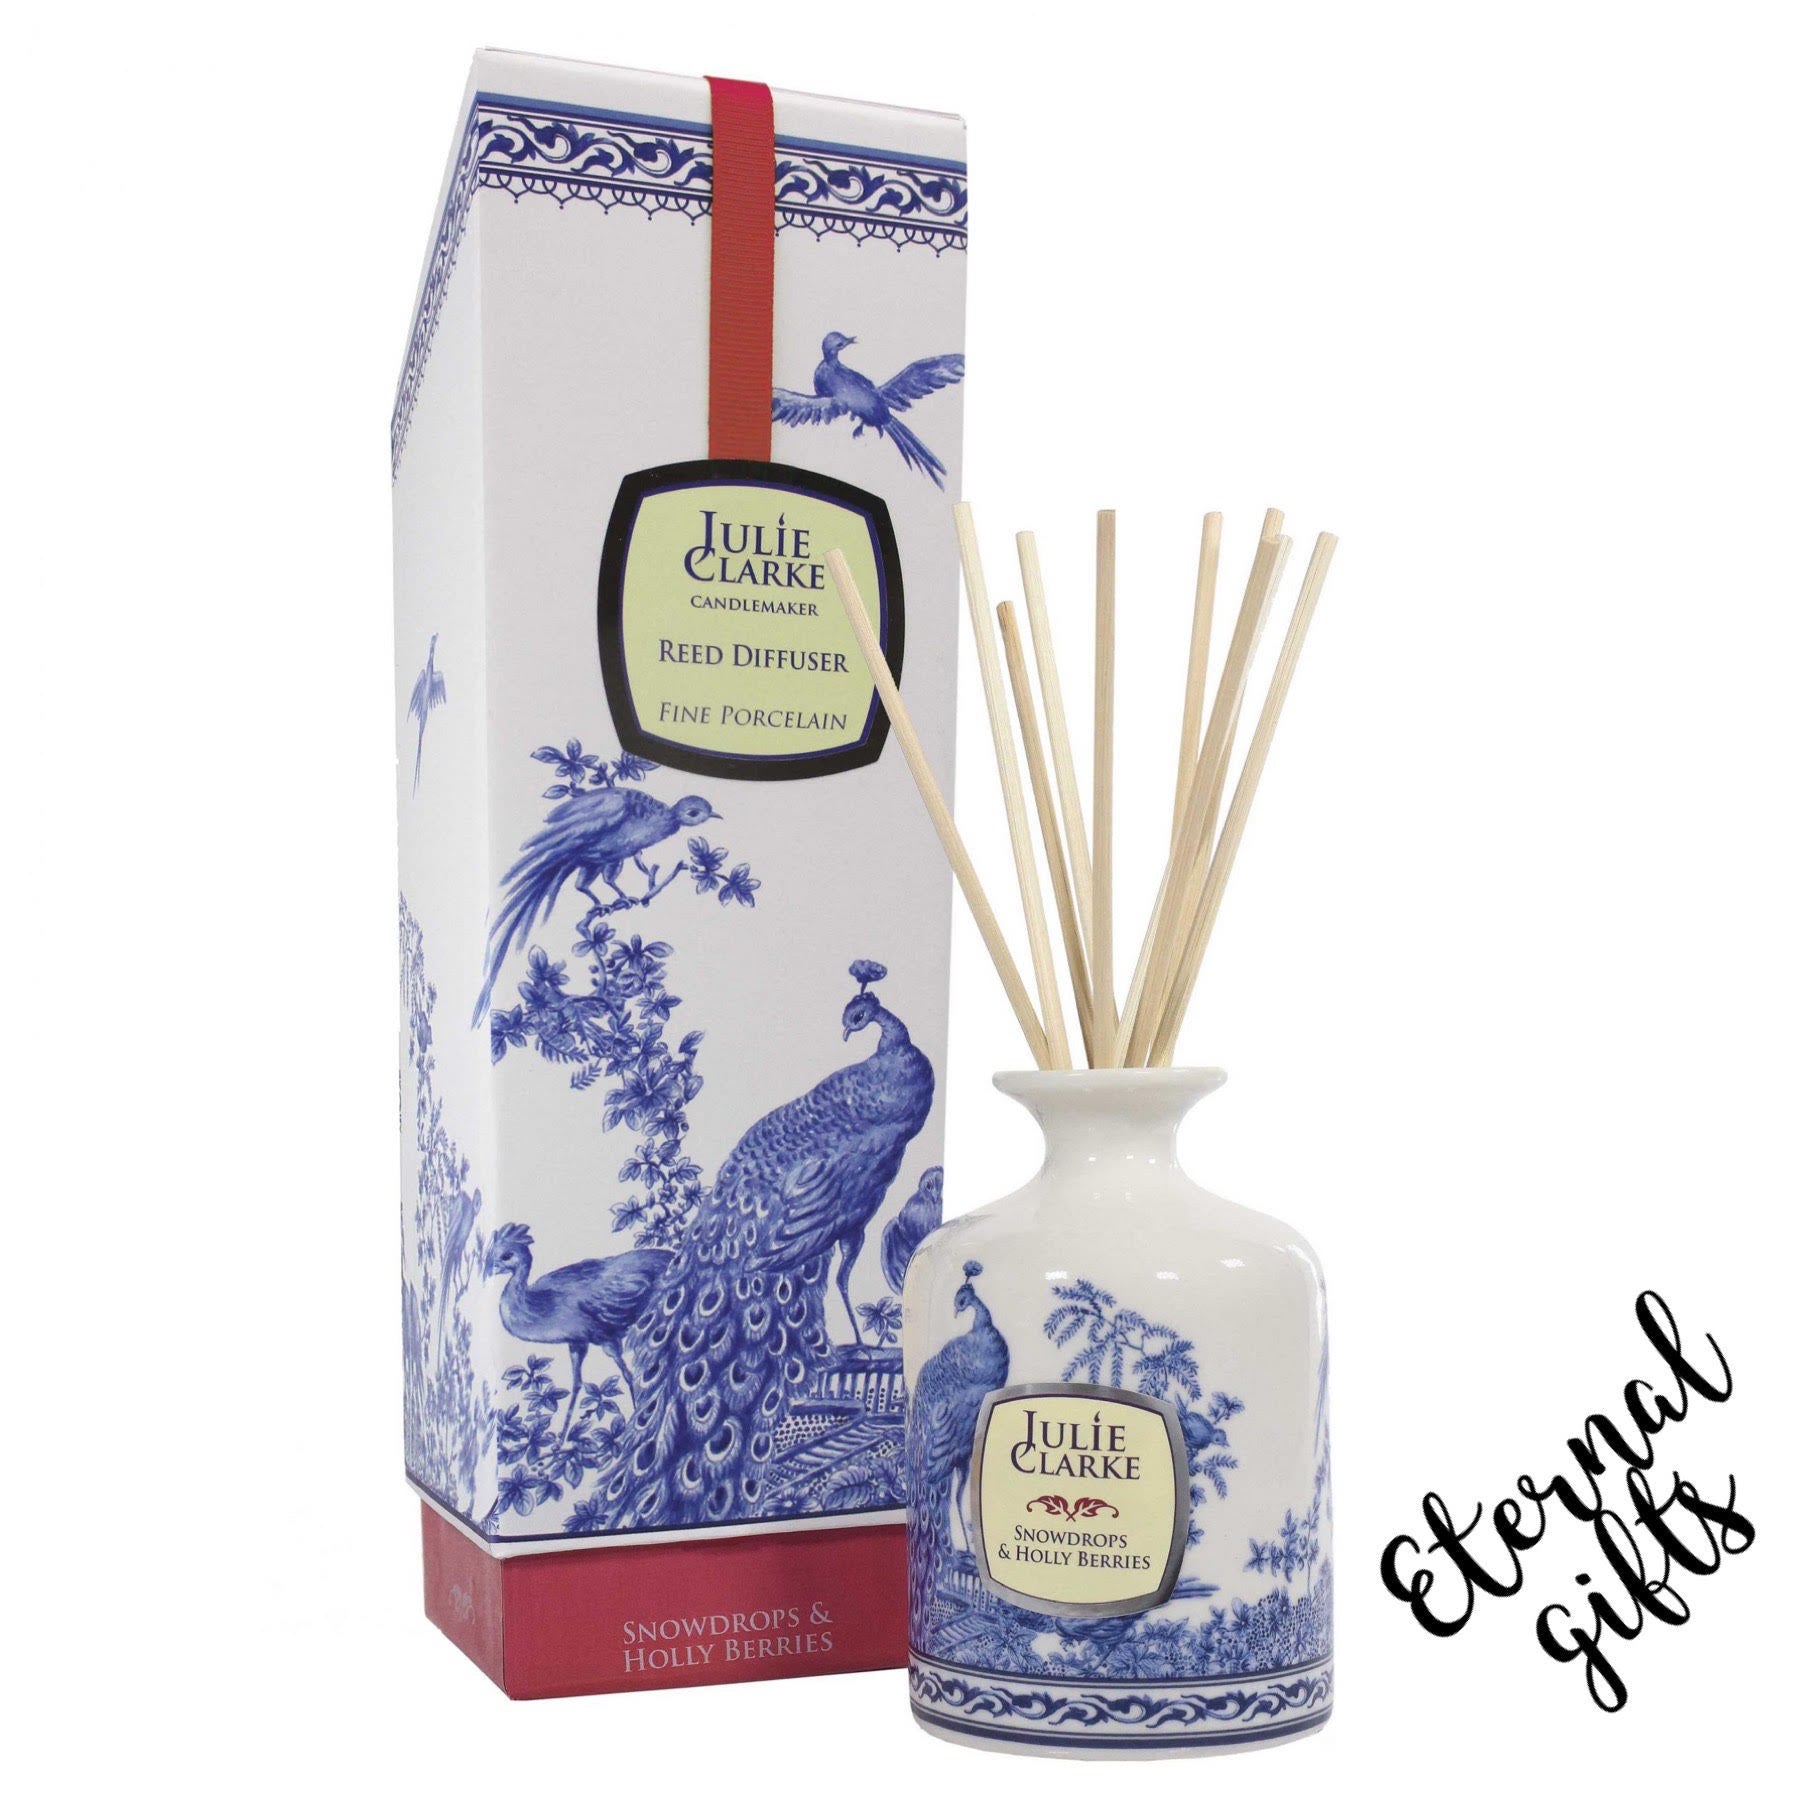 Snowdrops & Holly Diffuser Peacock Range by Julie Clarke